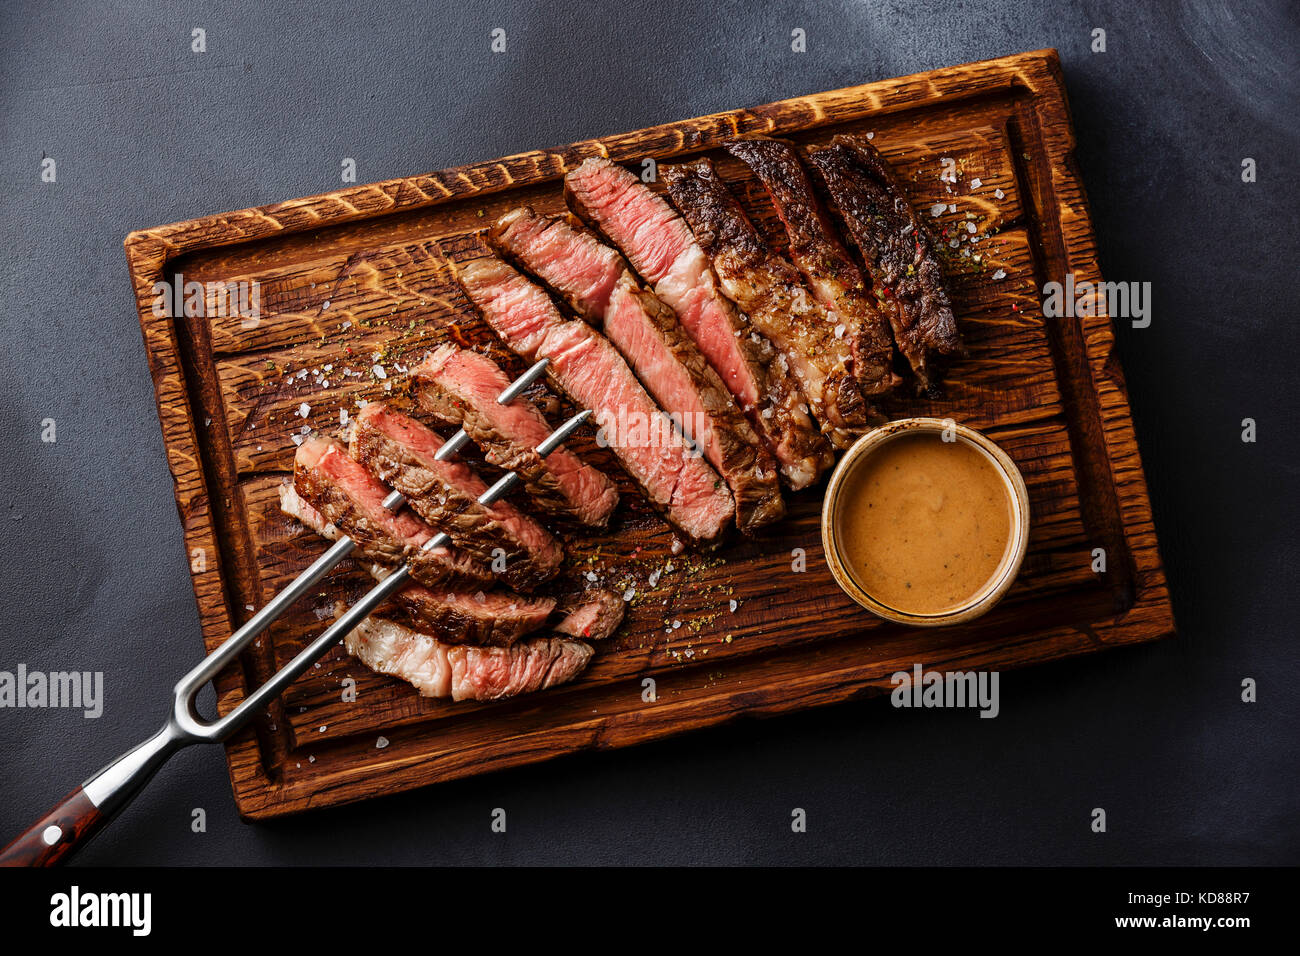 Sliced grilled meat steak Rib eye on meat fork and Pepper sauce on dark background Stock Photo